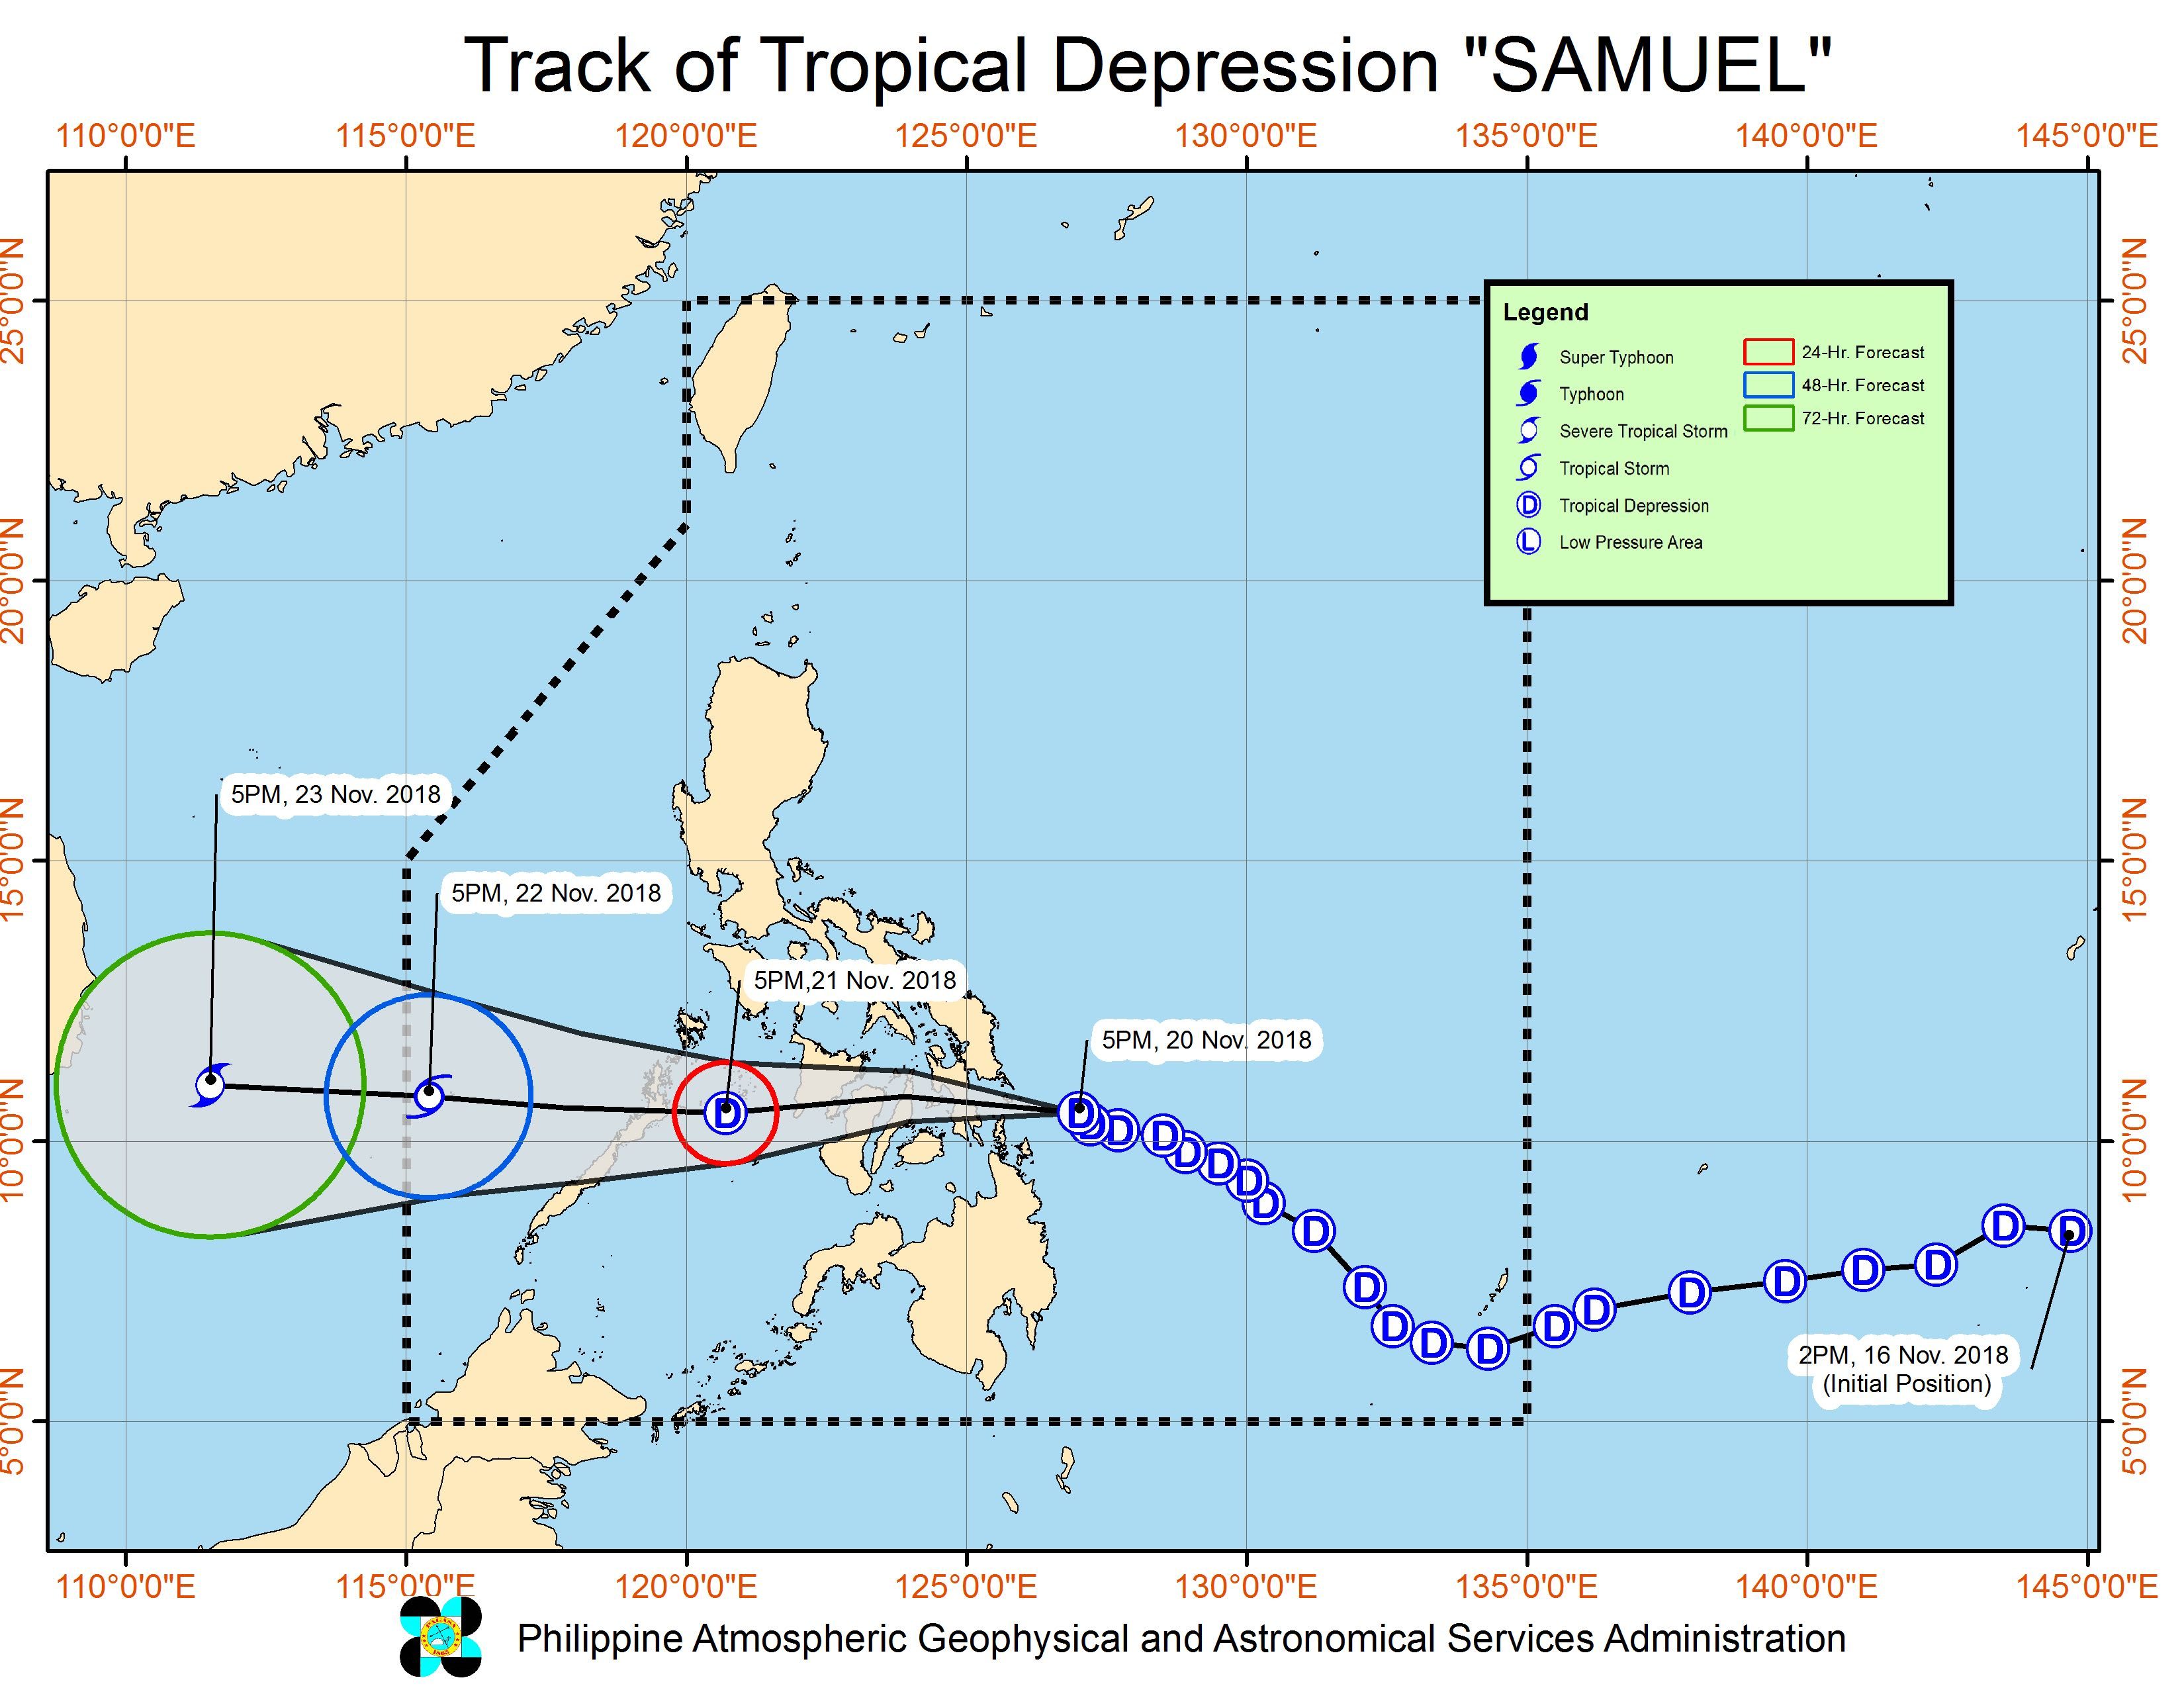 Forecast track of Tropical Depression Samuel as of November 20, 2018, 8 pm. Image from PAGASA 